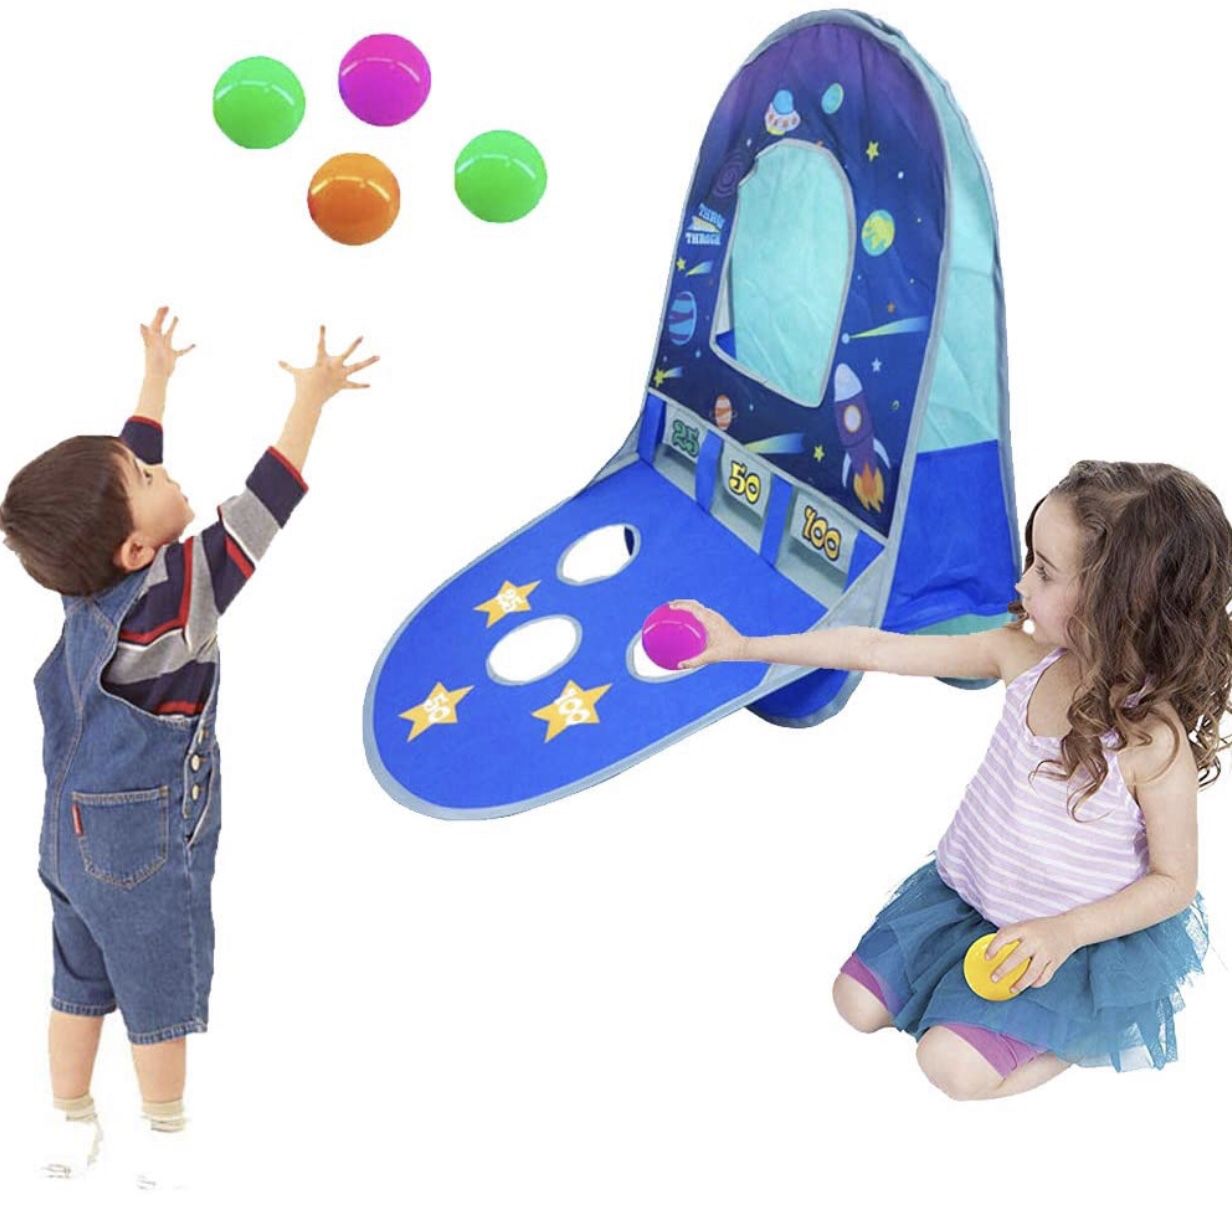 Kids/Children Waterproof Foldable Pop Up Indoor and Outdoor Basketball Score Hoop with 4 Balls Play Tent/Play House/Toys As a Gift for 1-6 Years Old